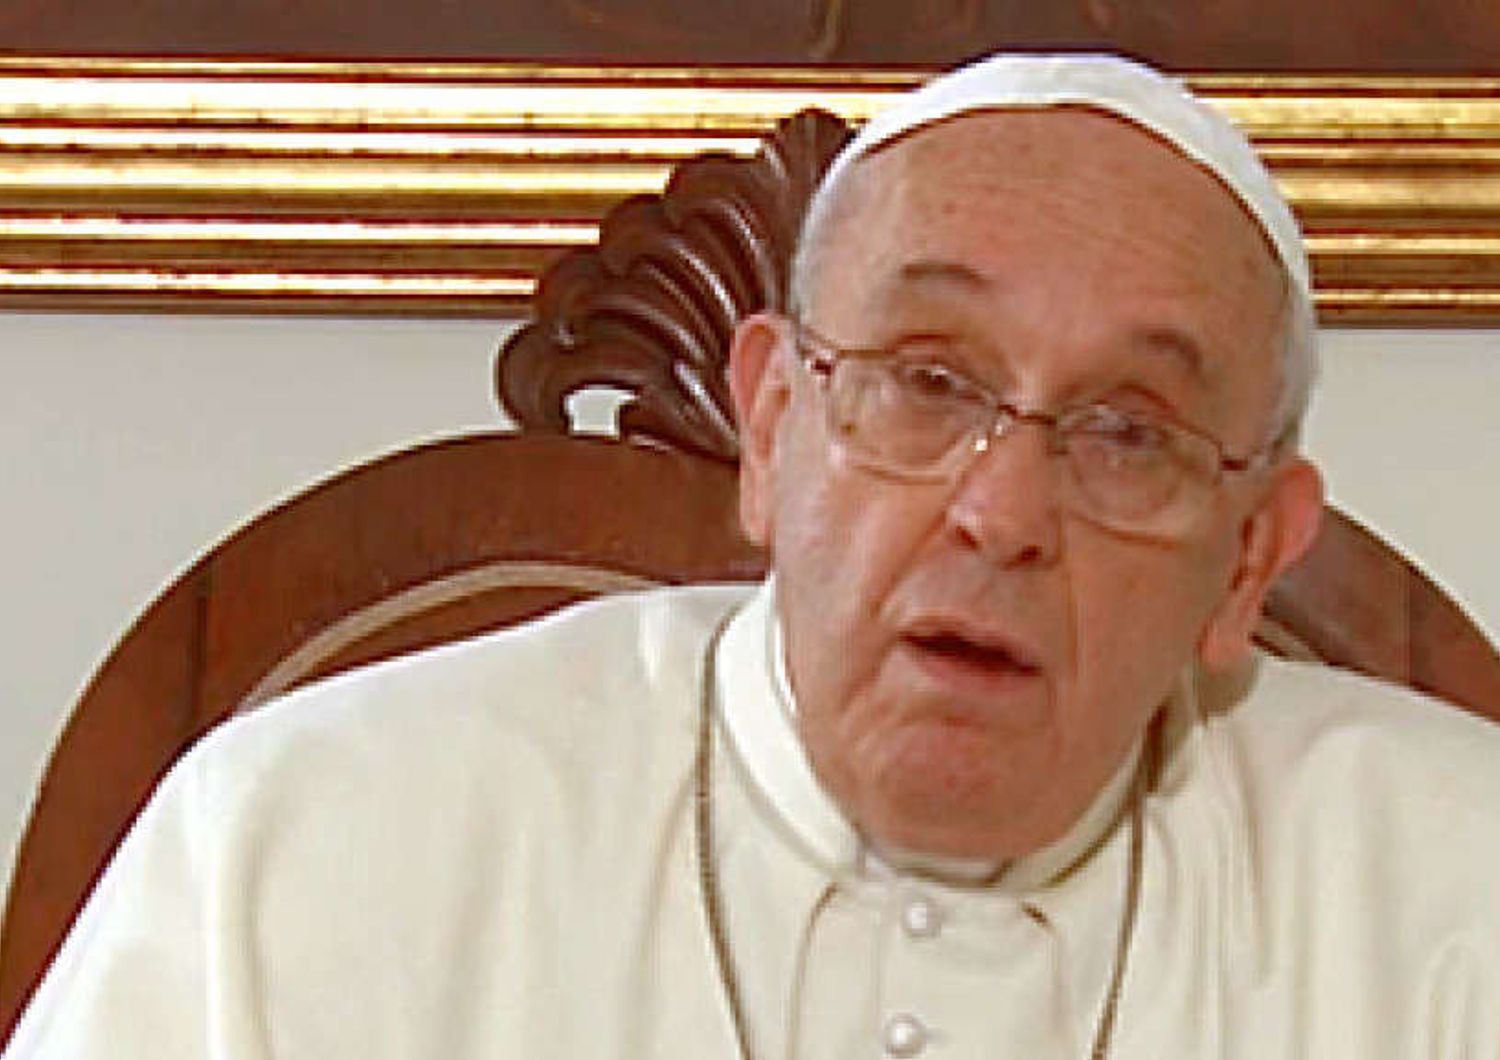 Pope Francis speaks out against disinformation